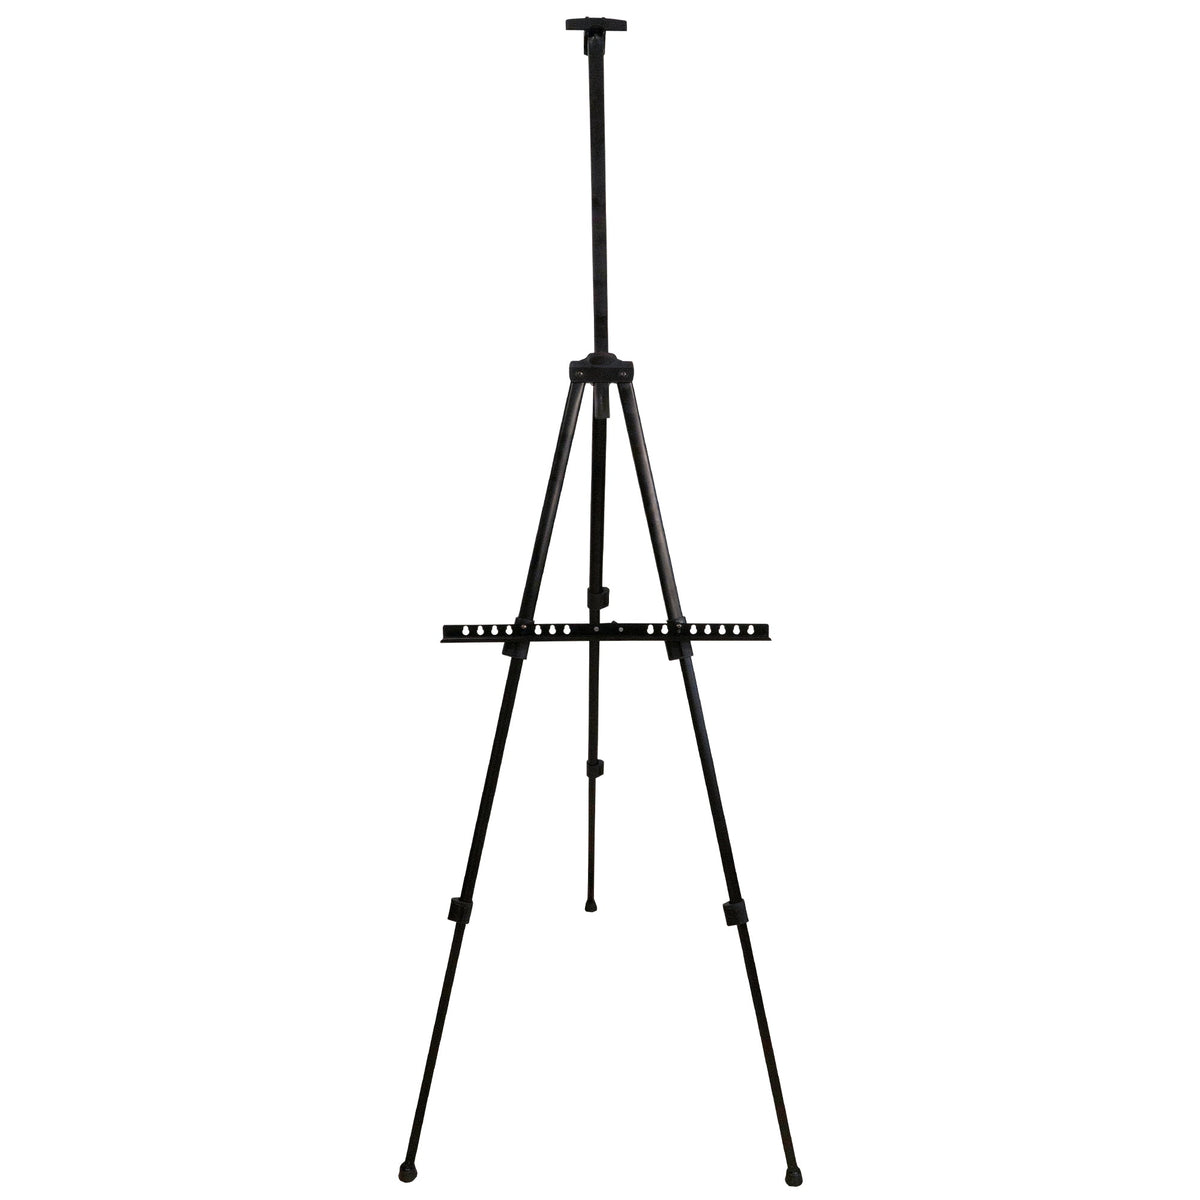 US IN STOCK] 63 Artist Easel Stand Aluminum Metal Tripod Display